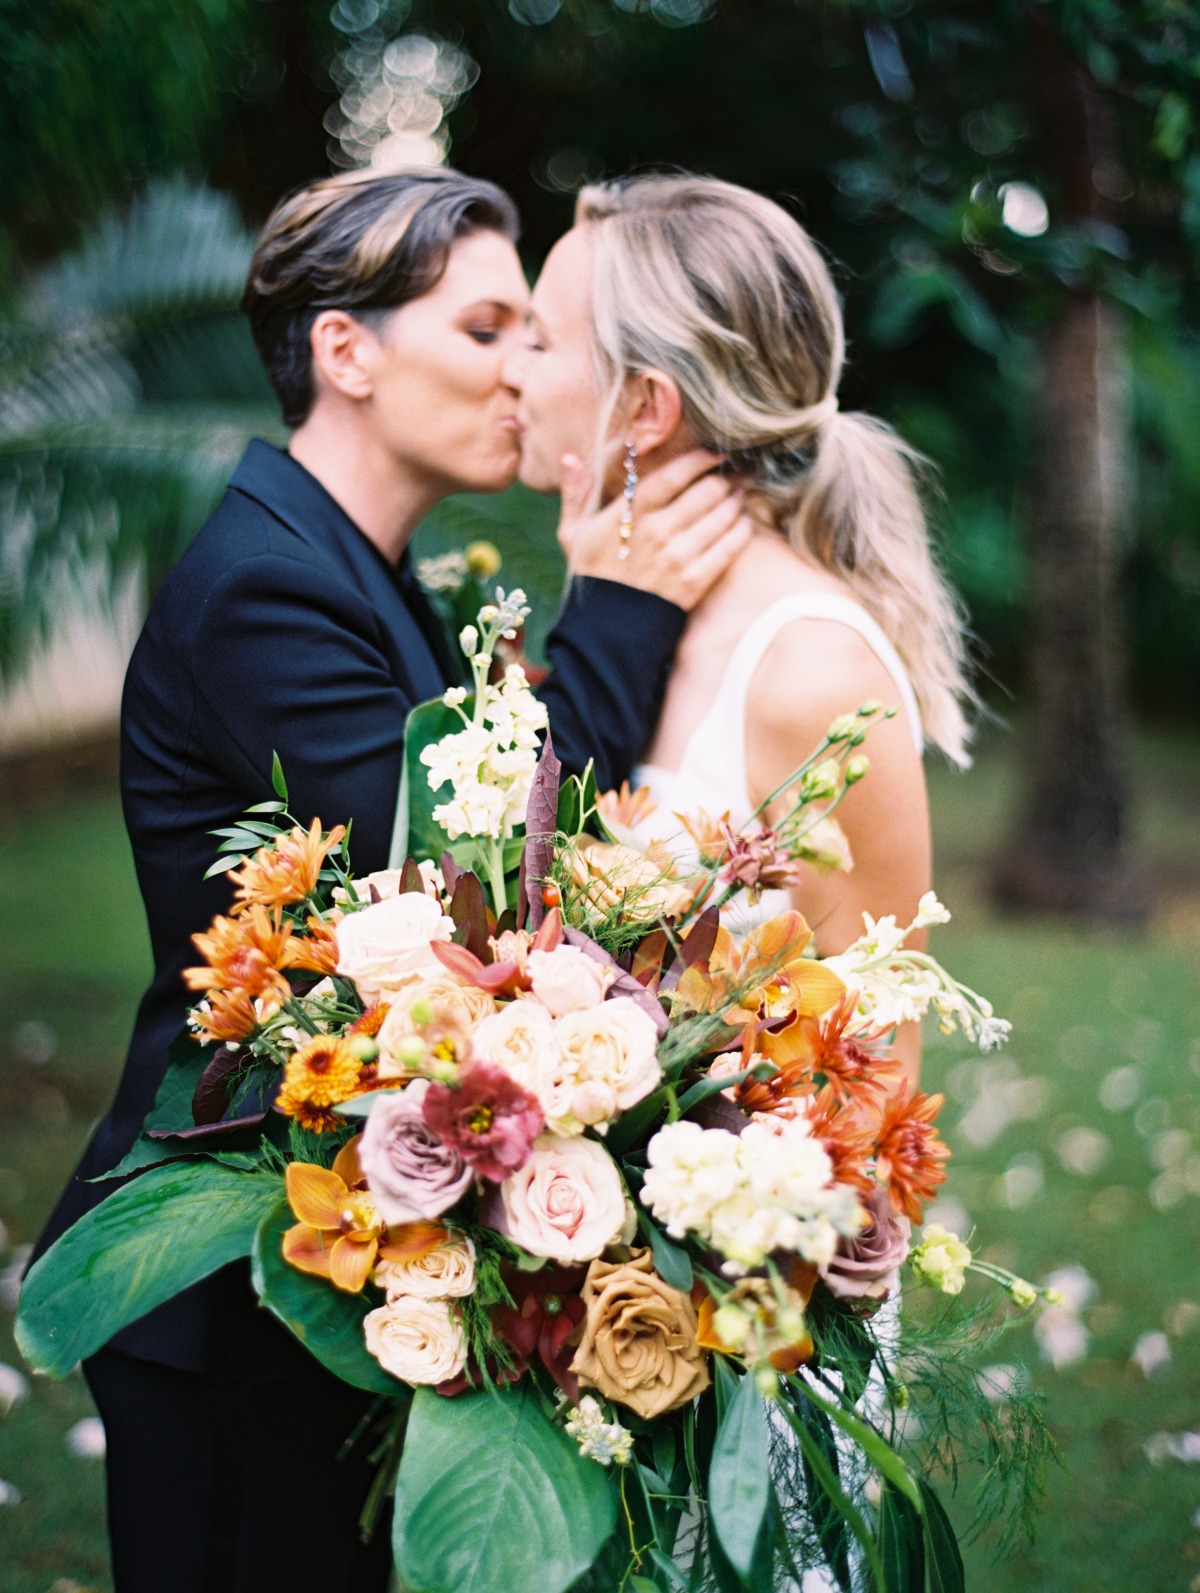 A Rainbow Wedding Preview In Kauai Is Exactly What This COVID-Planning Couple and Their Crew Needed